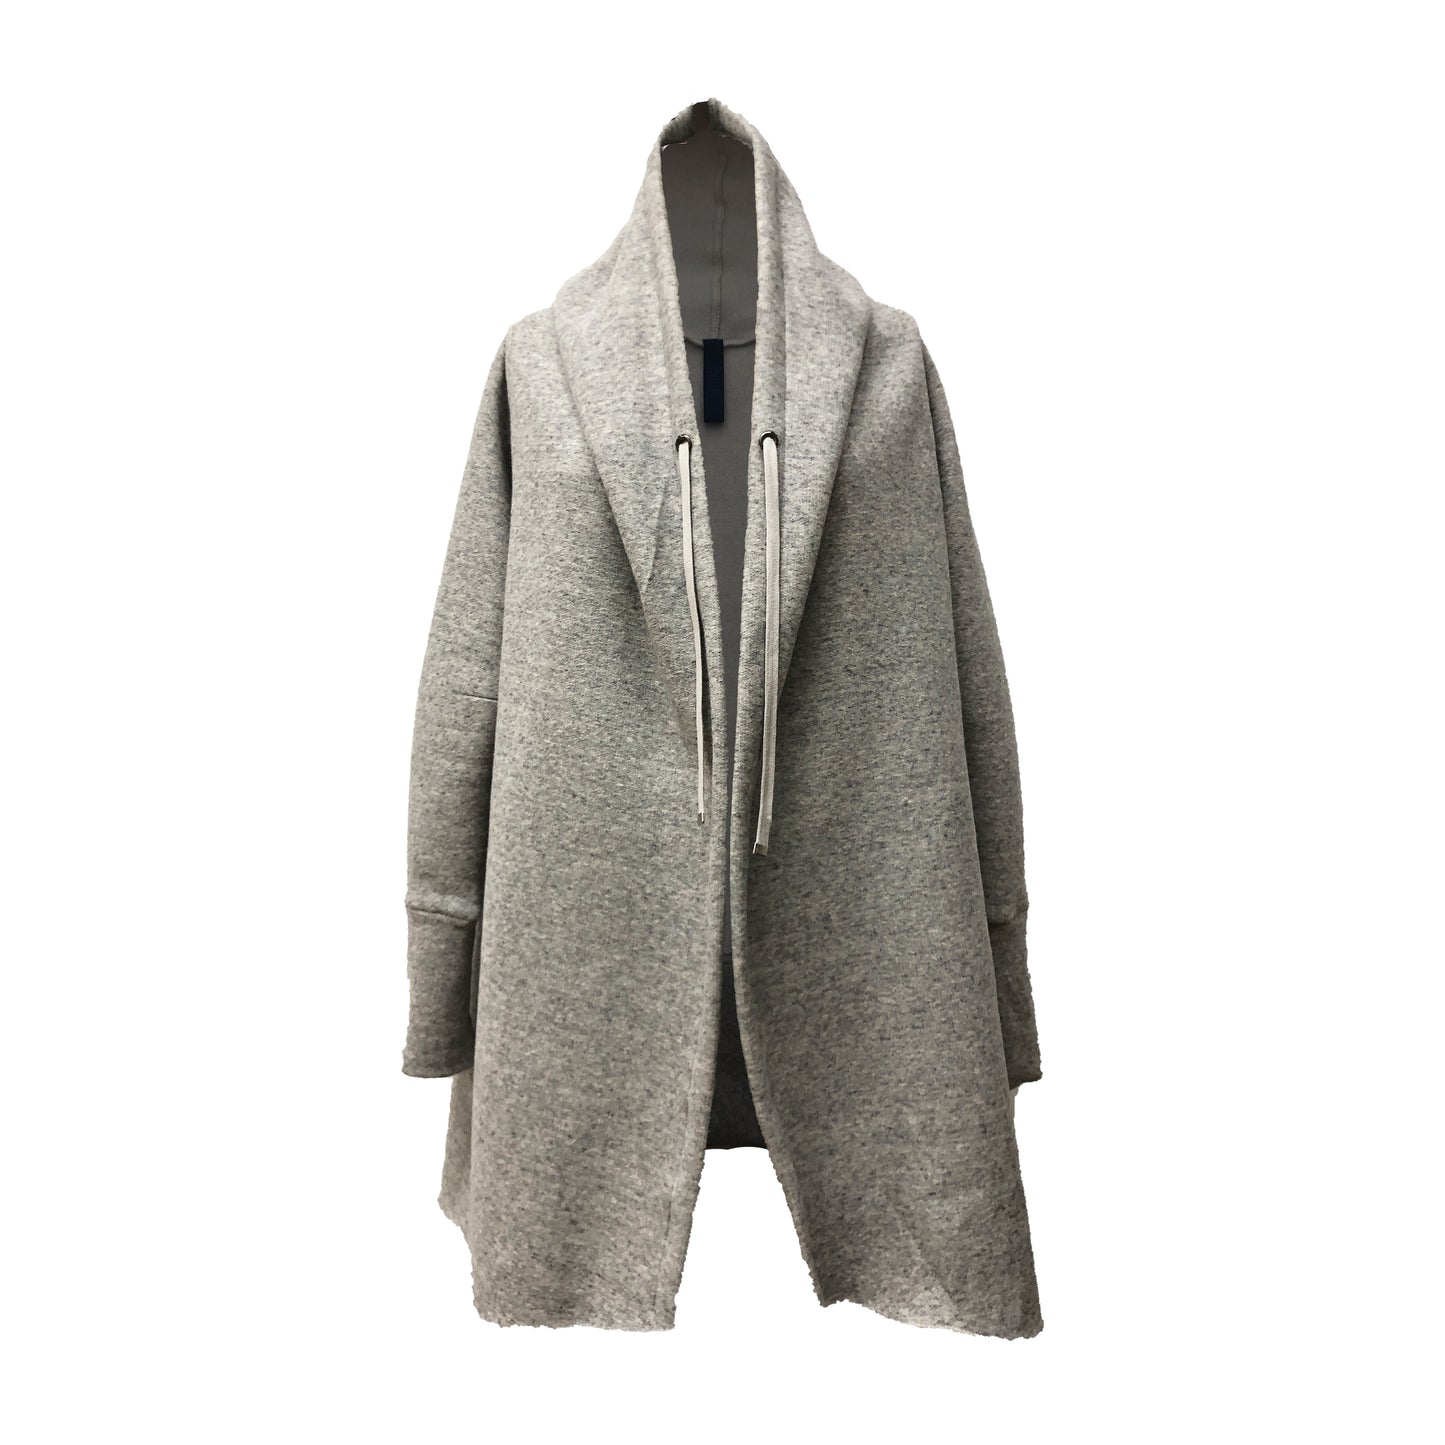 Loose gray cardigan with adjustable shawl collar and fitted sleeves